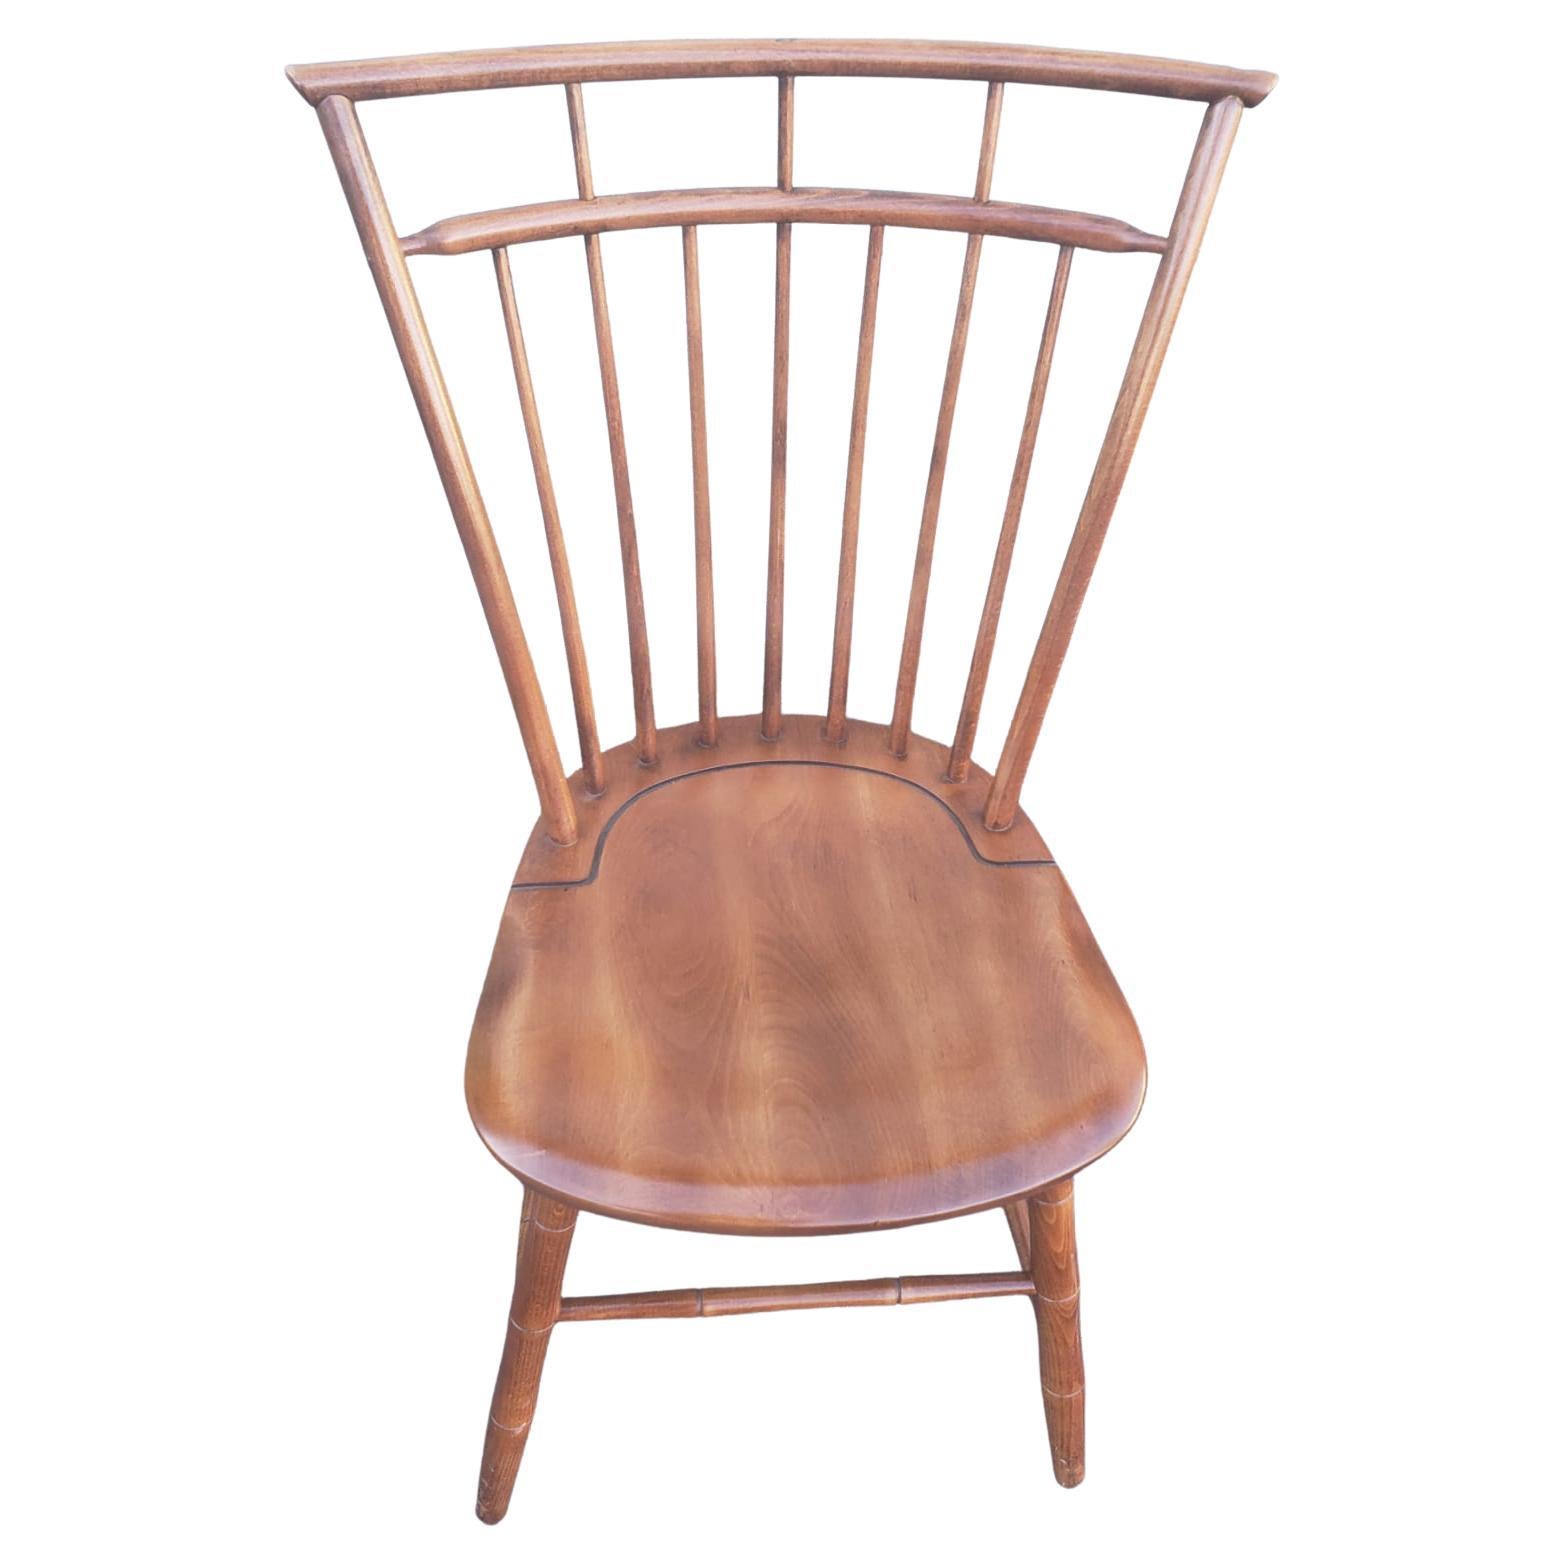 Yugoslavian Faux Bamboo Cherry Windsor Chair, Circa 1970s In Good Condition For Sale In Germantown, MD